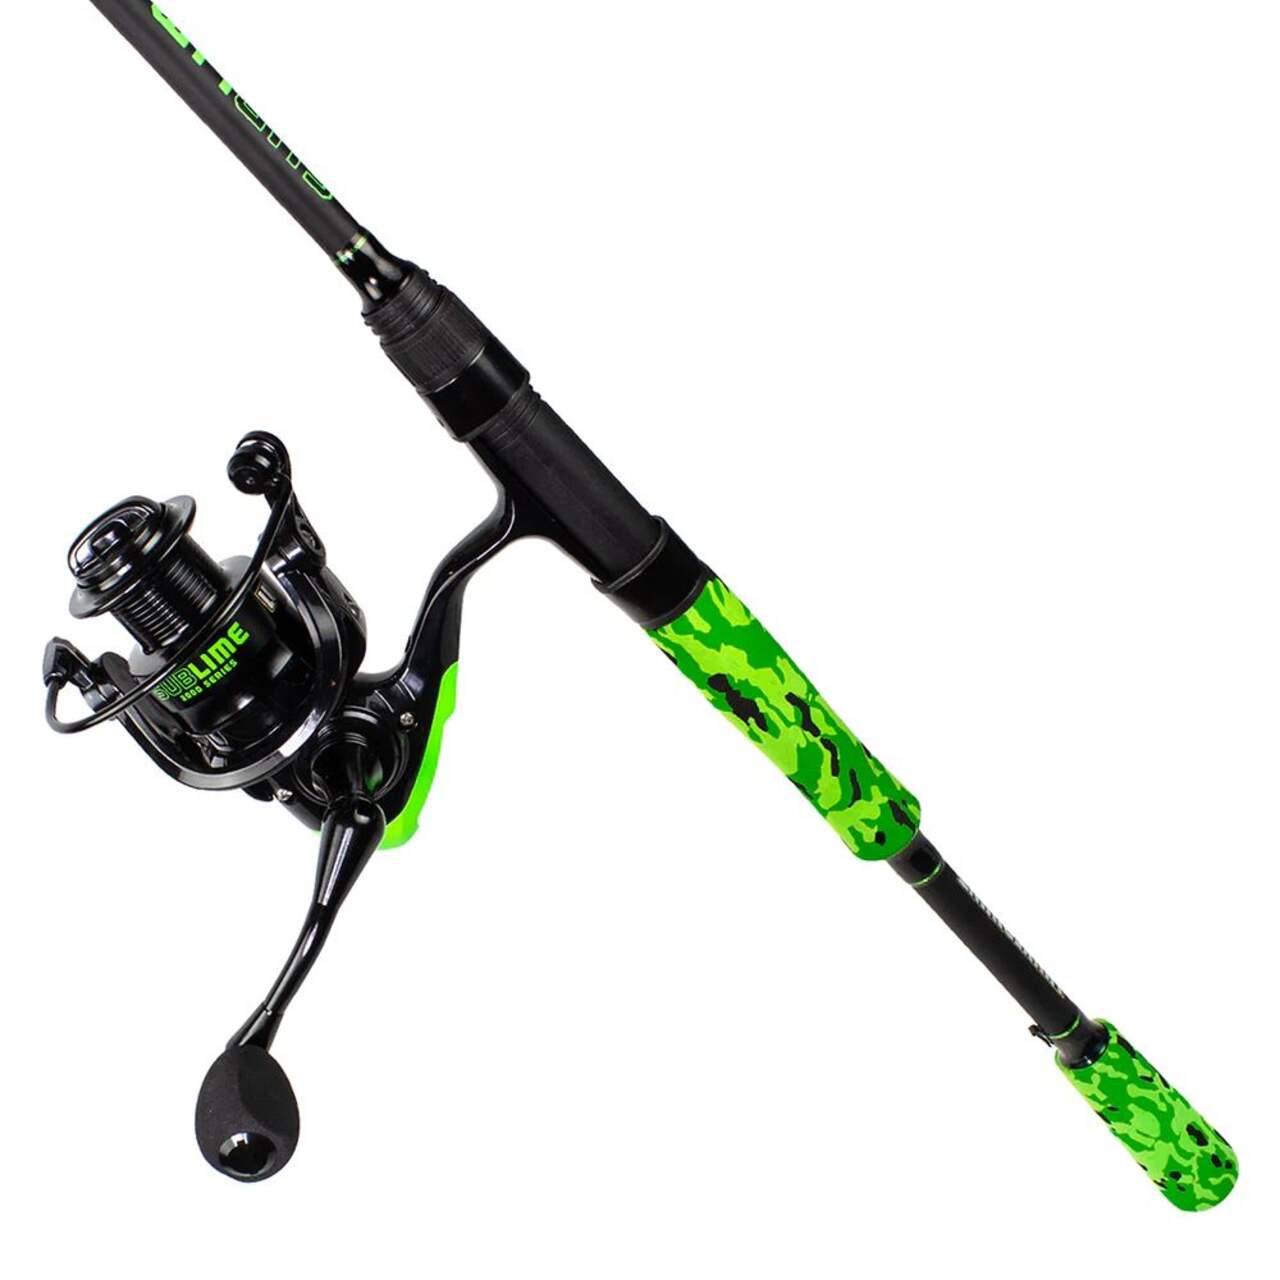 Lunkerhunt Sublime Spinning Fishing Rod and Reel Combo, Medium